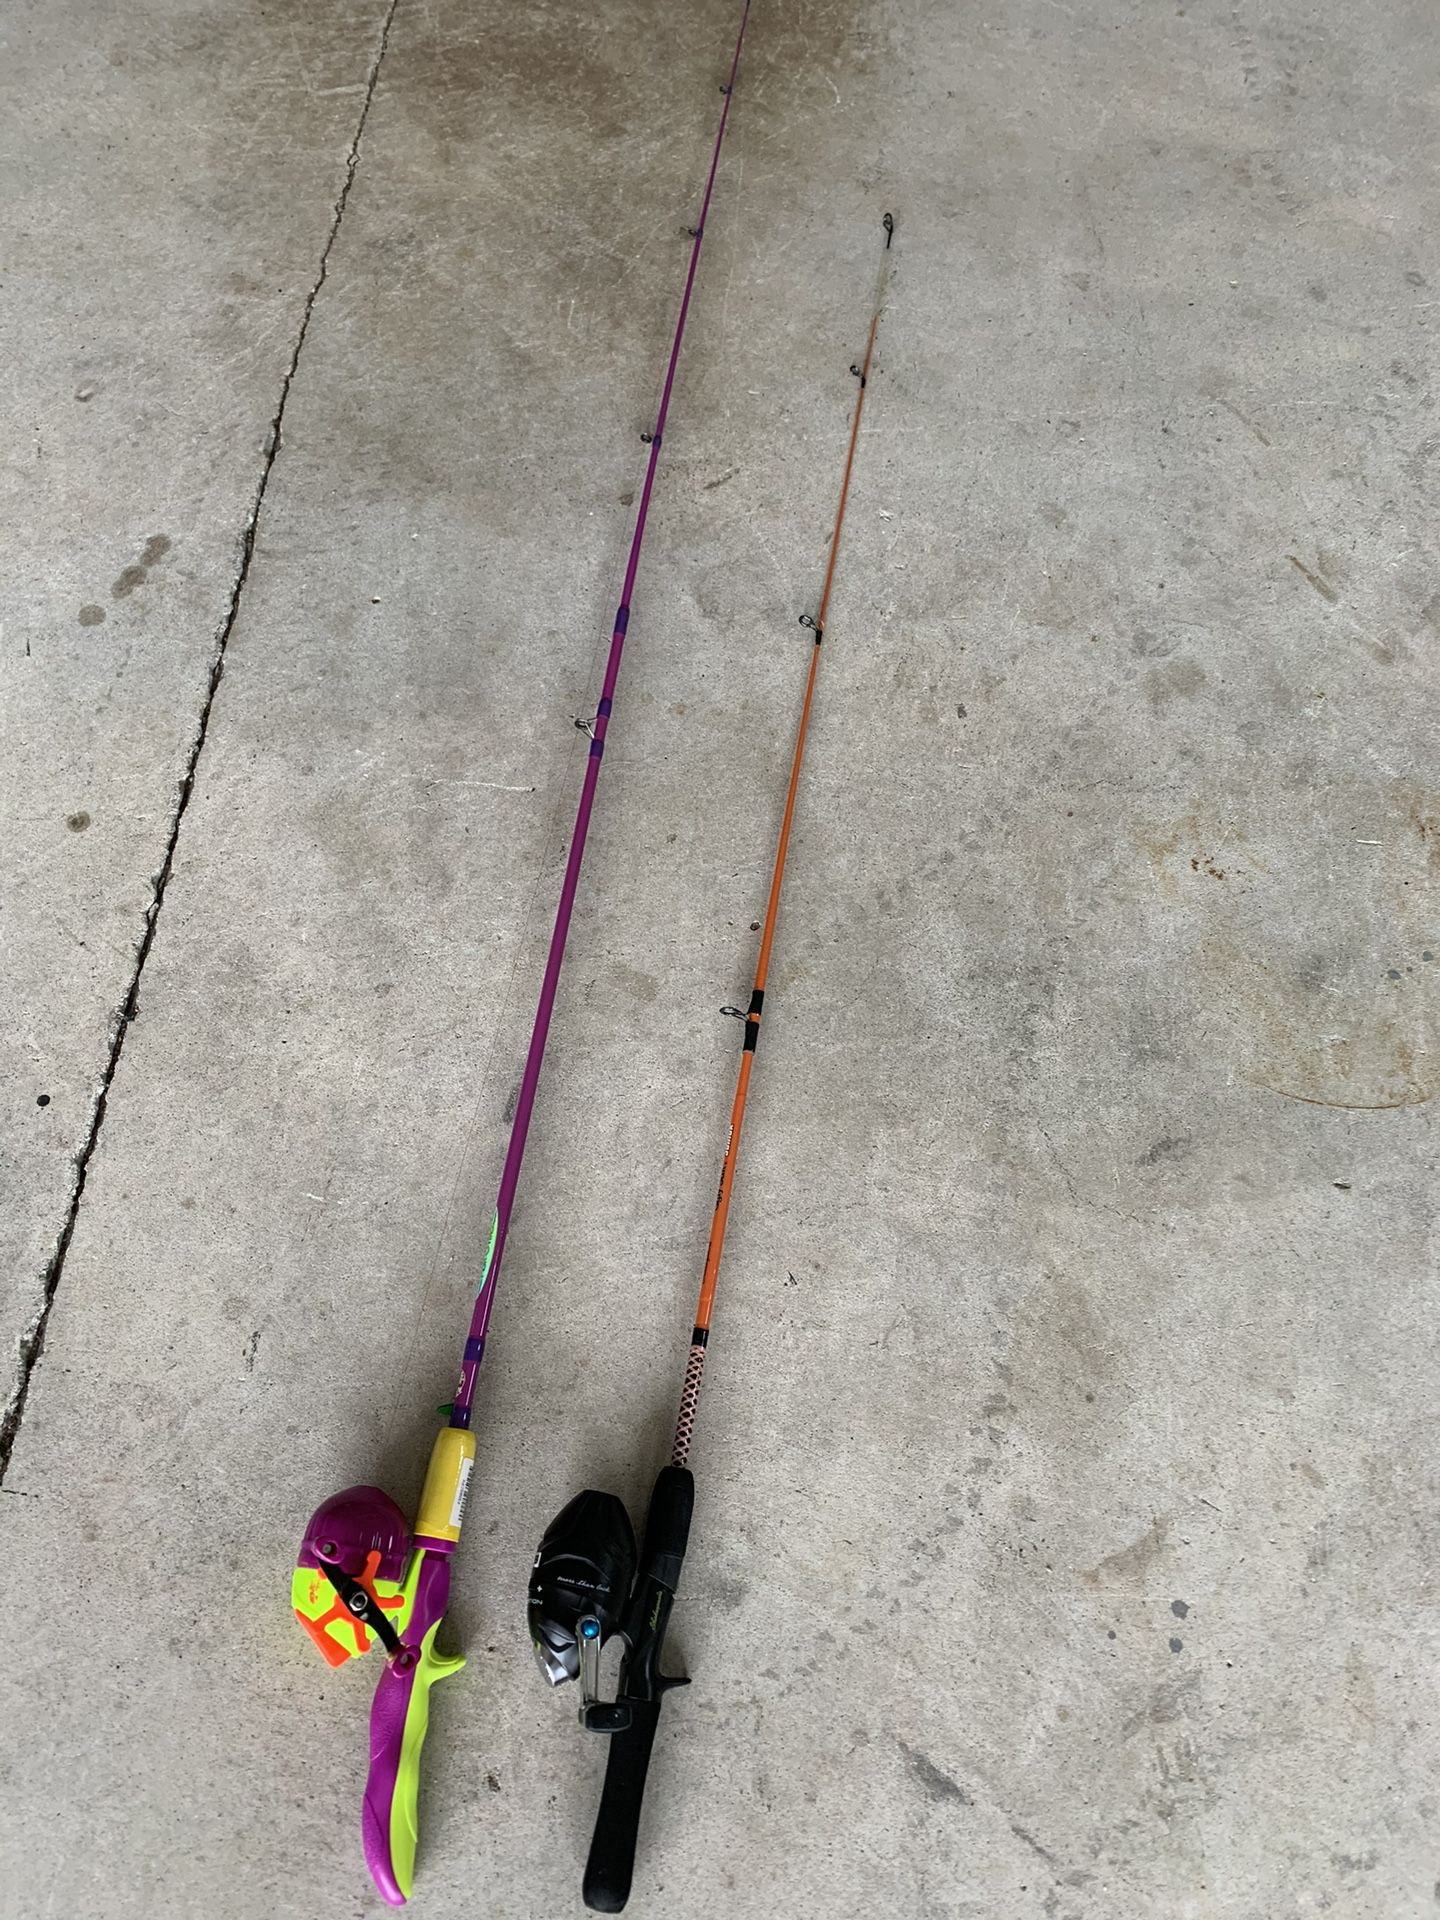 Two Kids Fishing 🎣 Poles/ Rods And Reel